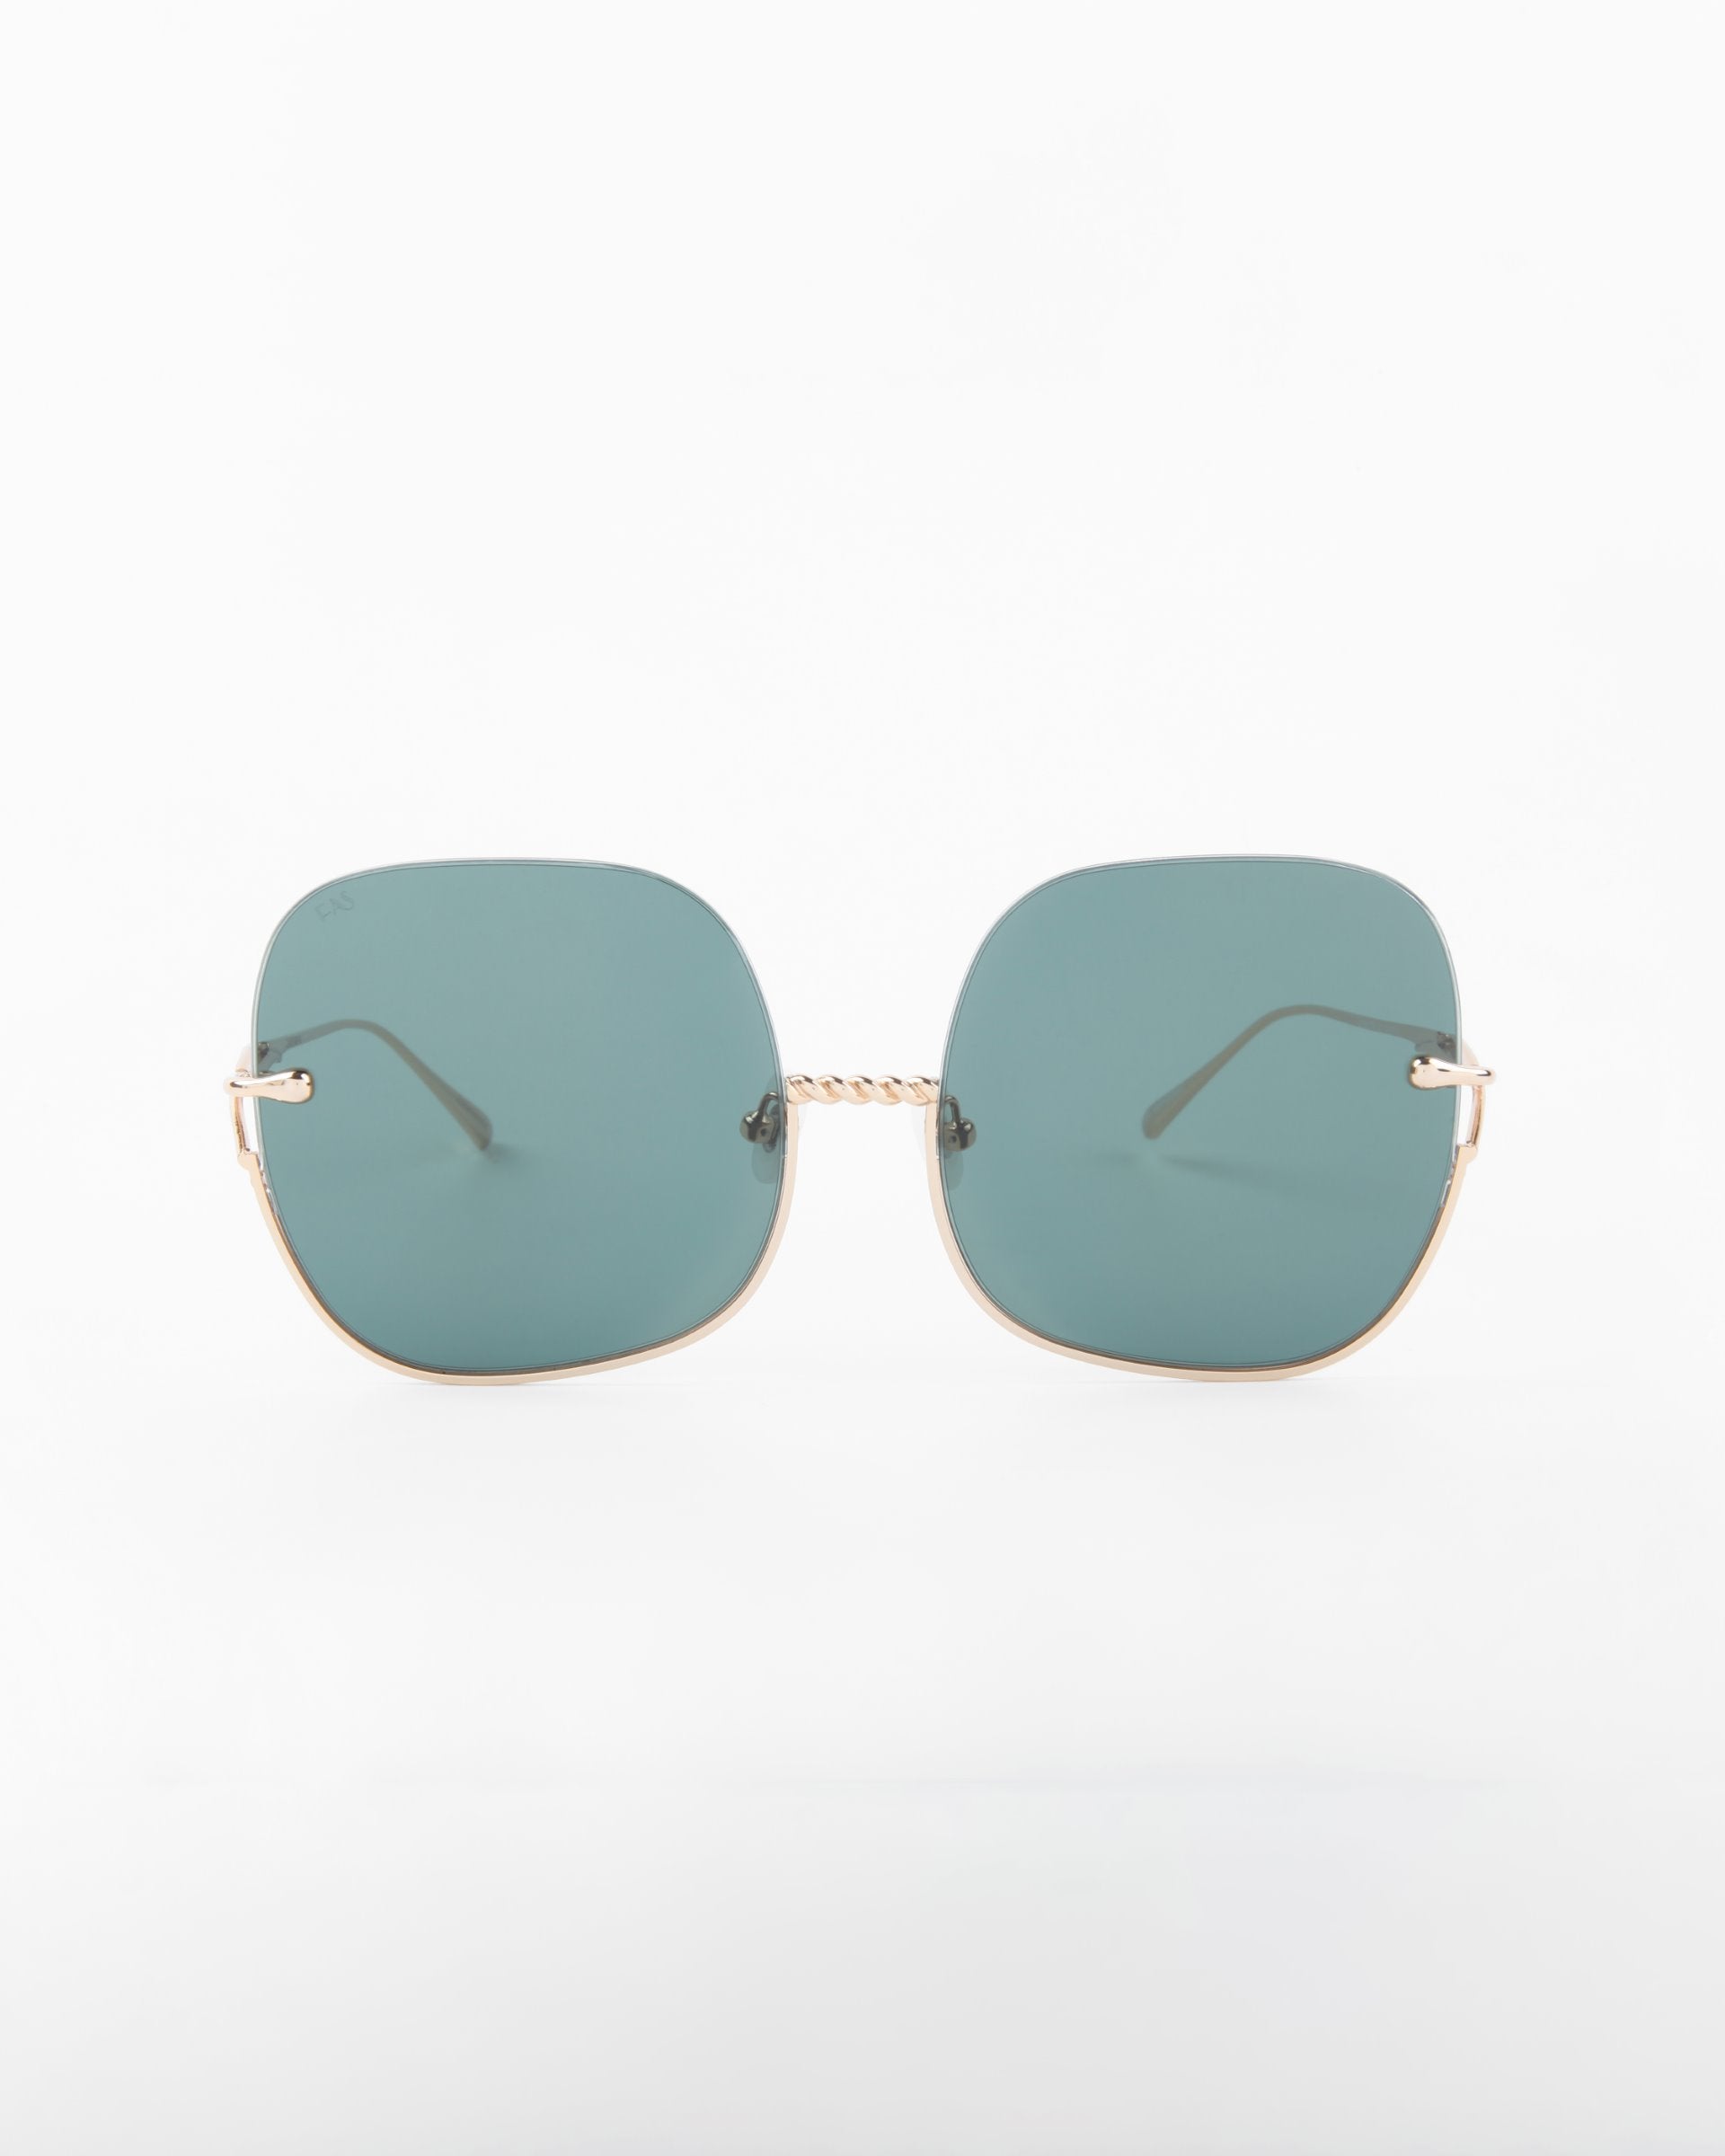 A pair of stylish Duchess sunglasses from For Art&#39;s Sake® with large, square-shaped, shatter-resistant lenses tinted in a cool blue color. The frame is minimalistic with thin, gold-colored arms and a delicate twisted bridge. With UVA &amp; UVB protection, the handmade gold-plated frame stands out against the plain white background, emphasizing the design.